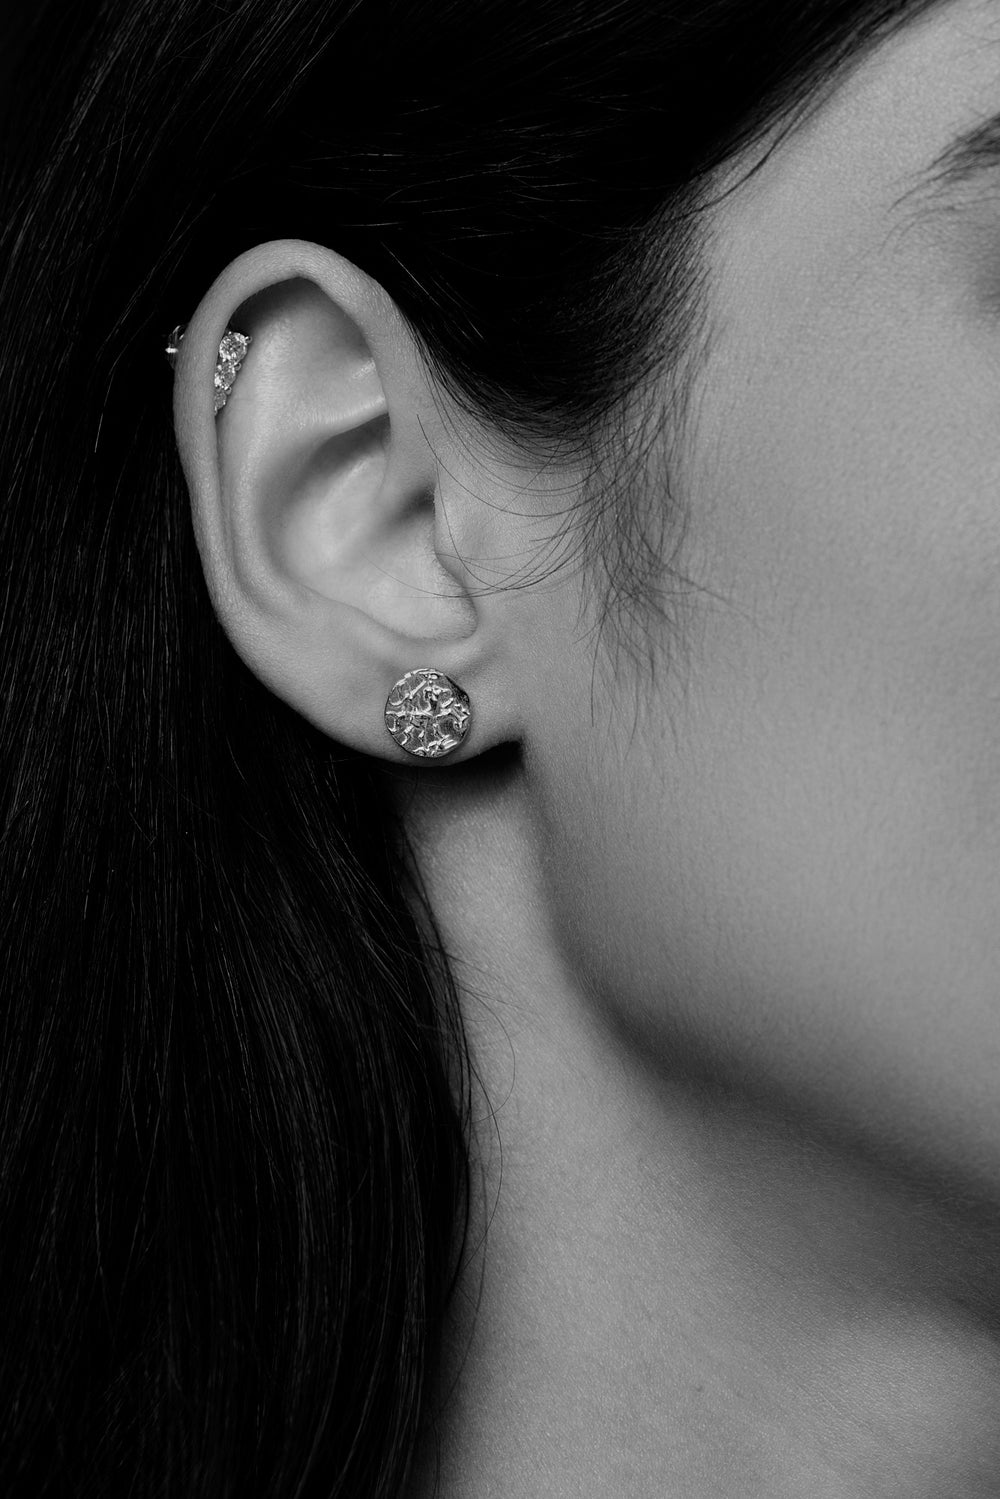 Coin Stud Earrings | Silver or 9K White Gold, More Options Available| Natasha Schweitzer